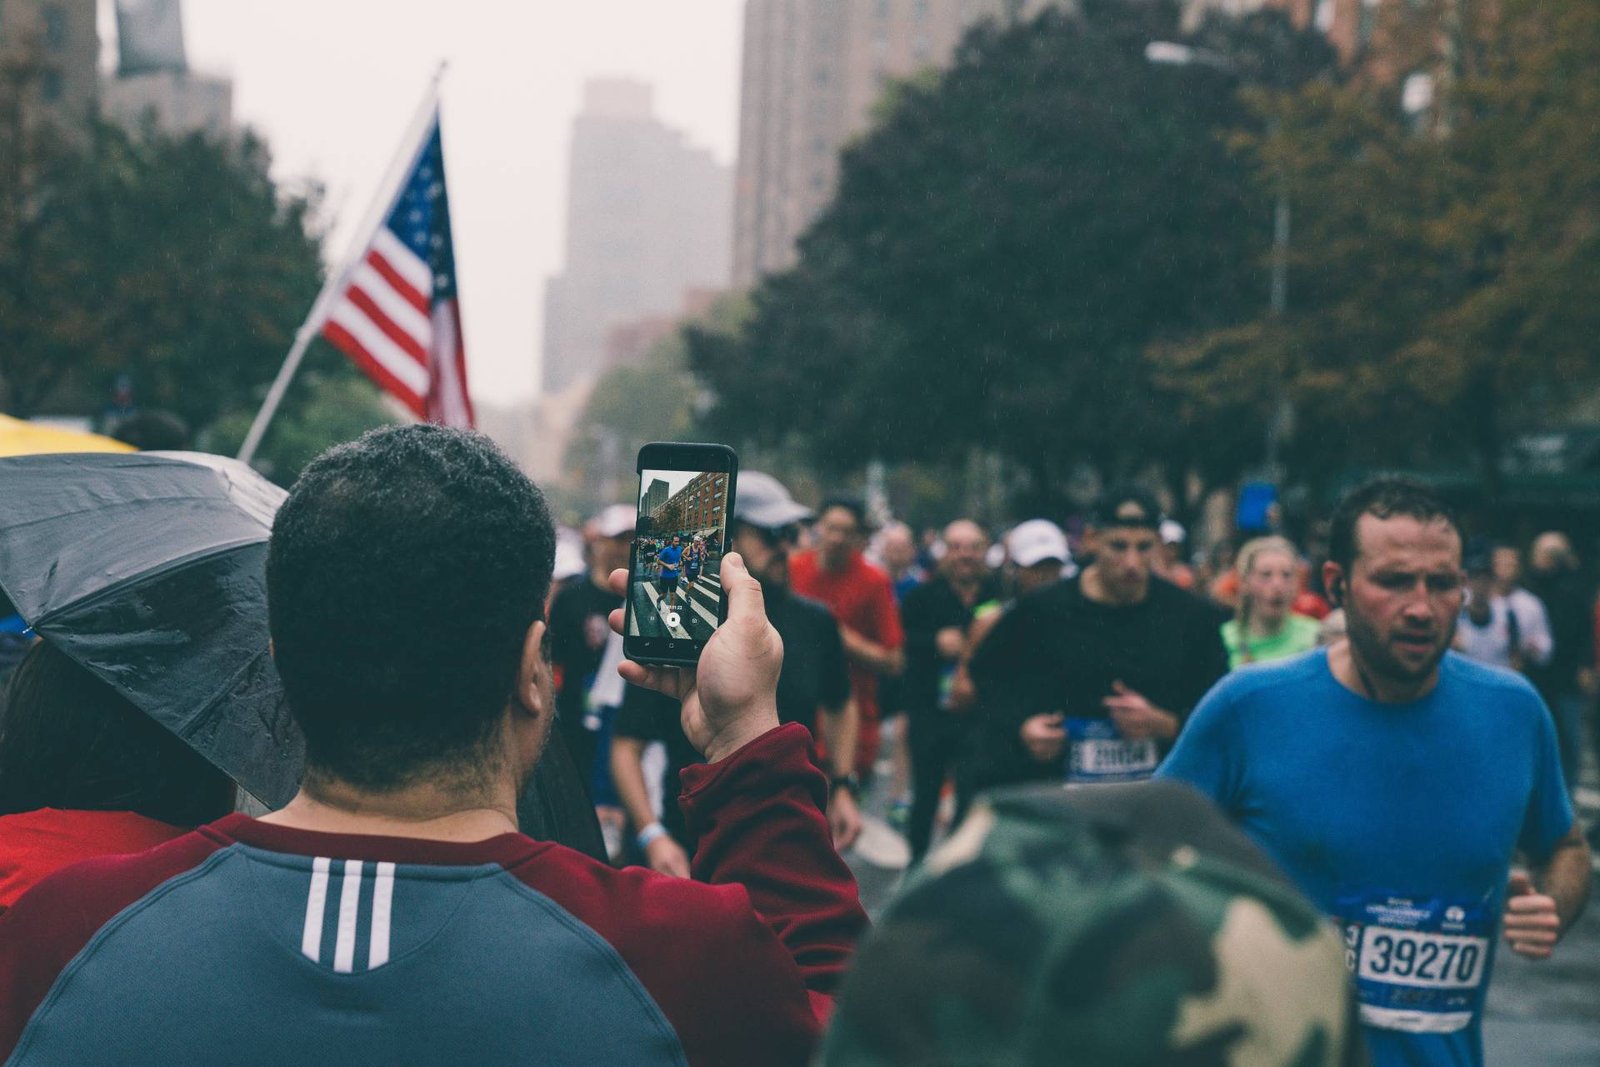 Mastercard and the NYC Marathon: Empowering Small Businesses #Mastercard #NYC #Marathon #Empowering #Small #Businesses